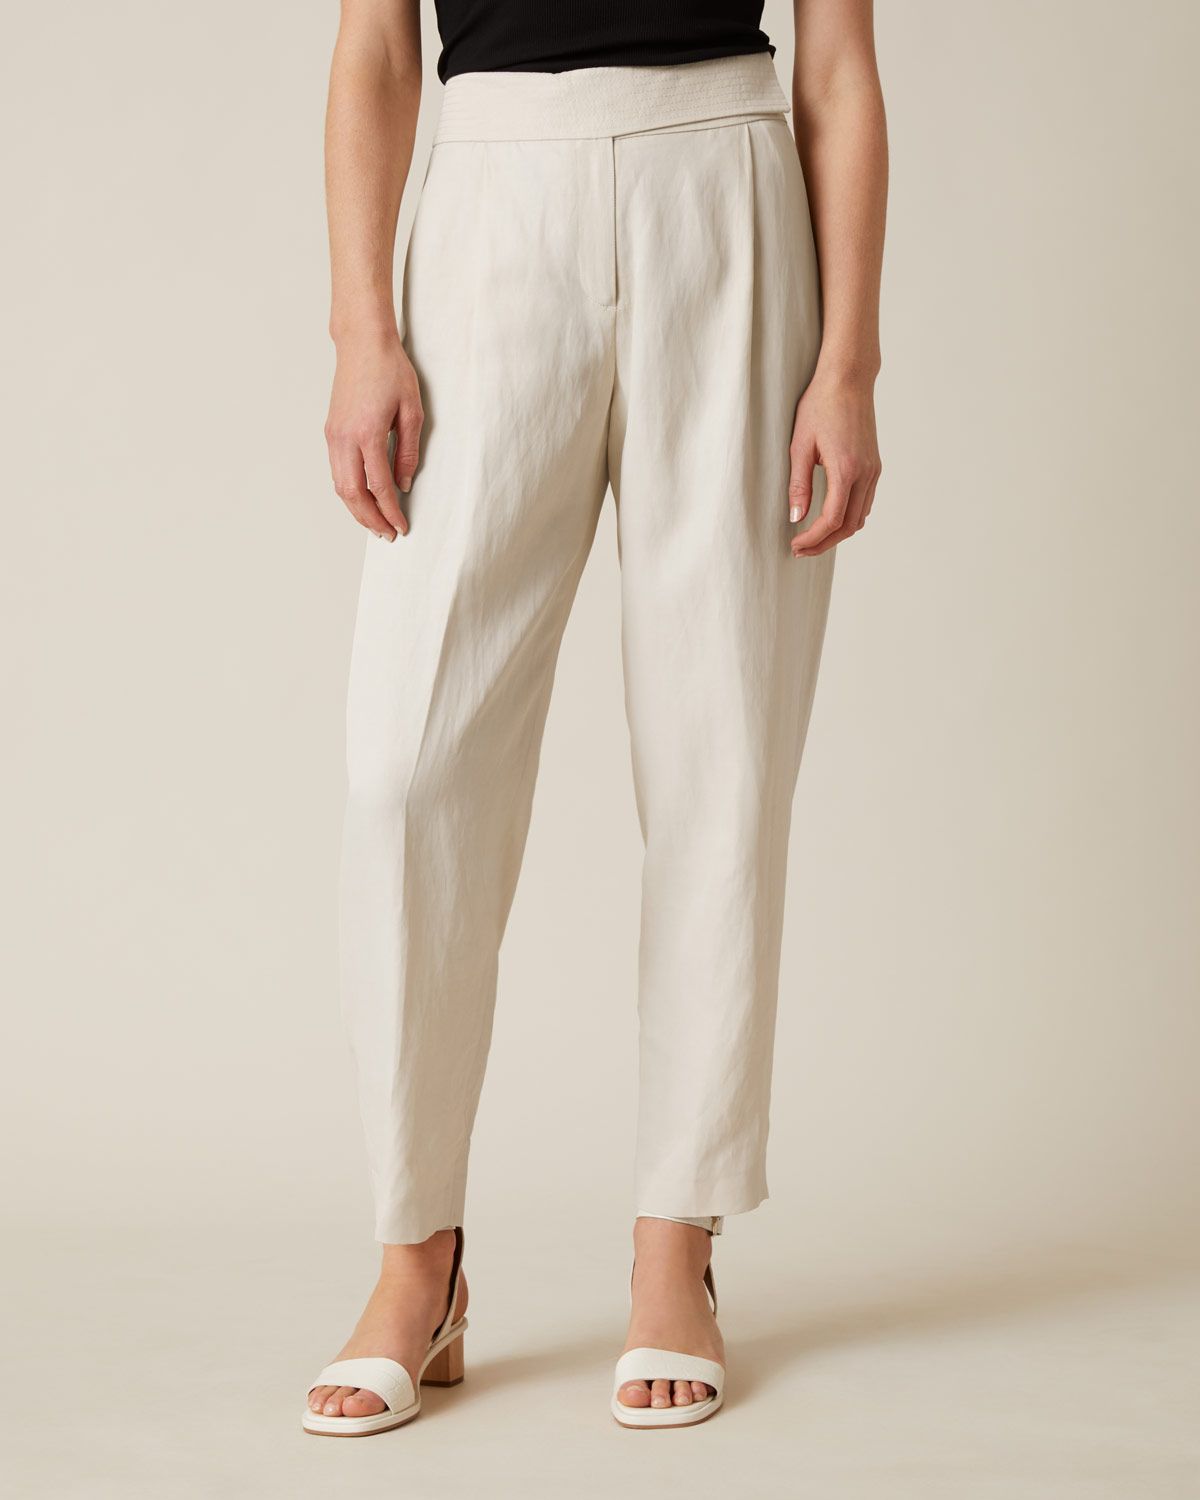 Italian linen trousers. Slightly wider at the thigh. Narrow and multi-stitched hem. Subtle textural twills for fluid effect.